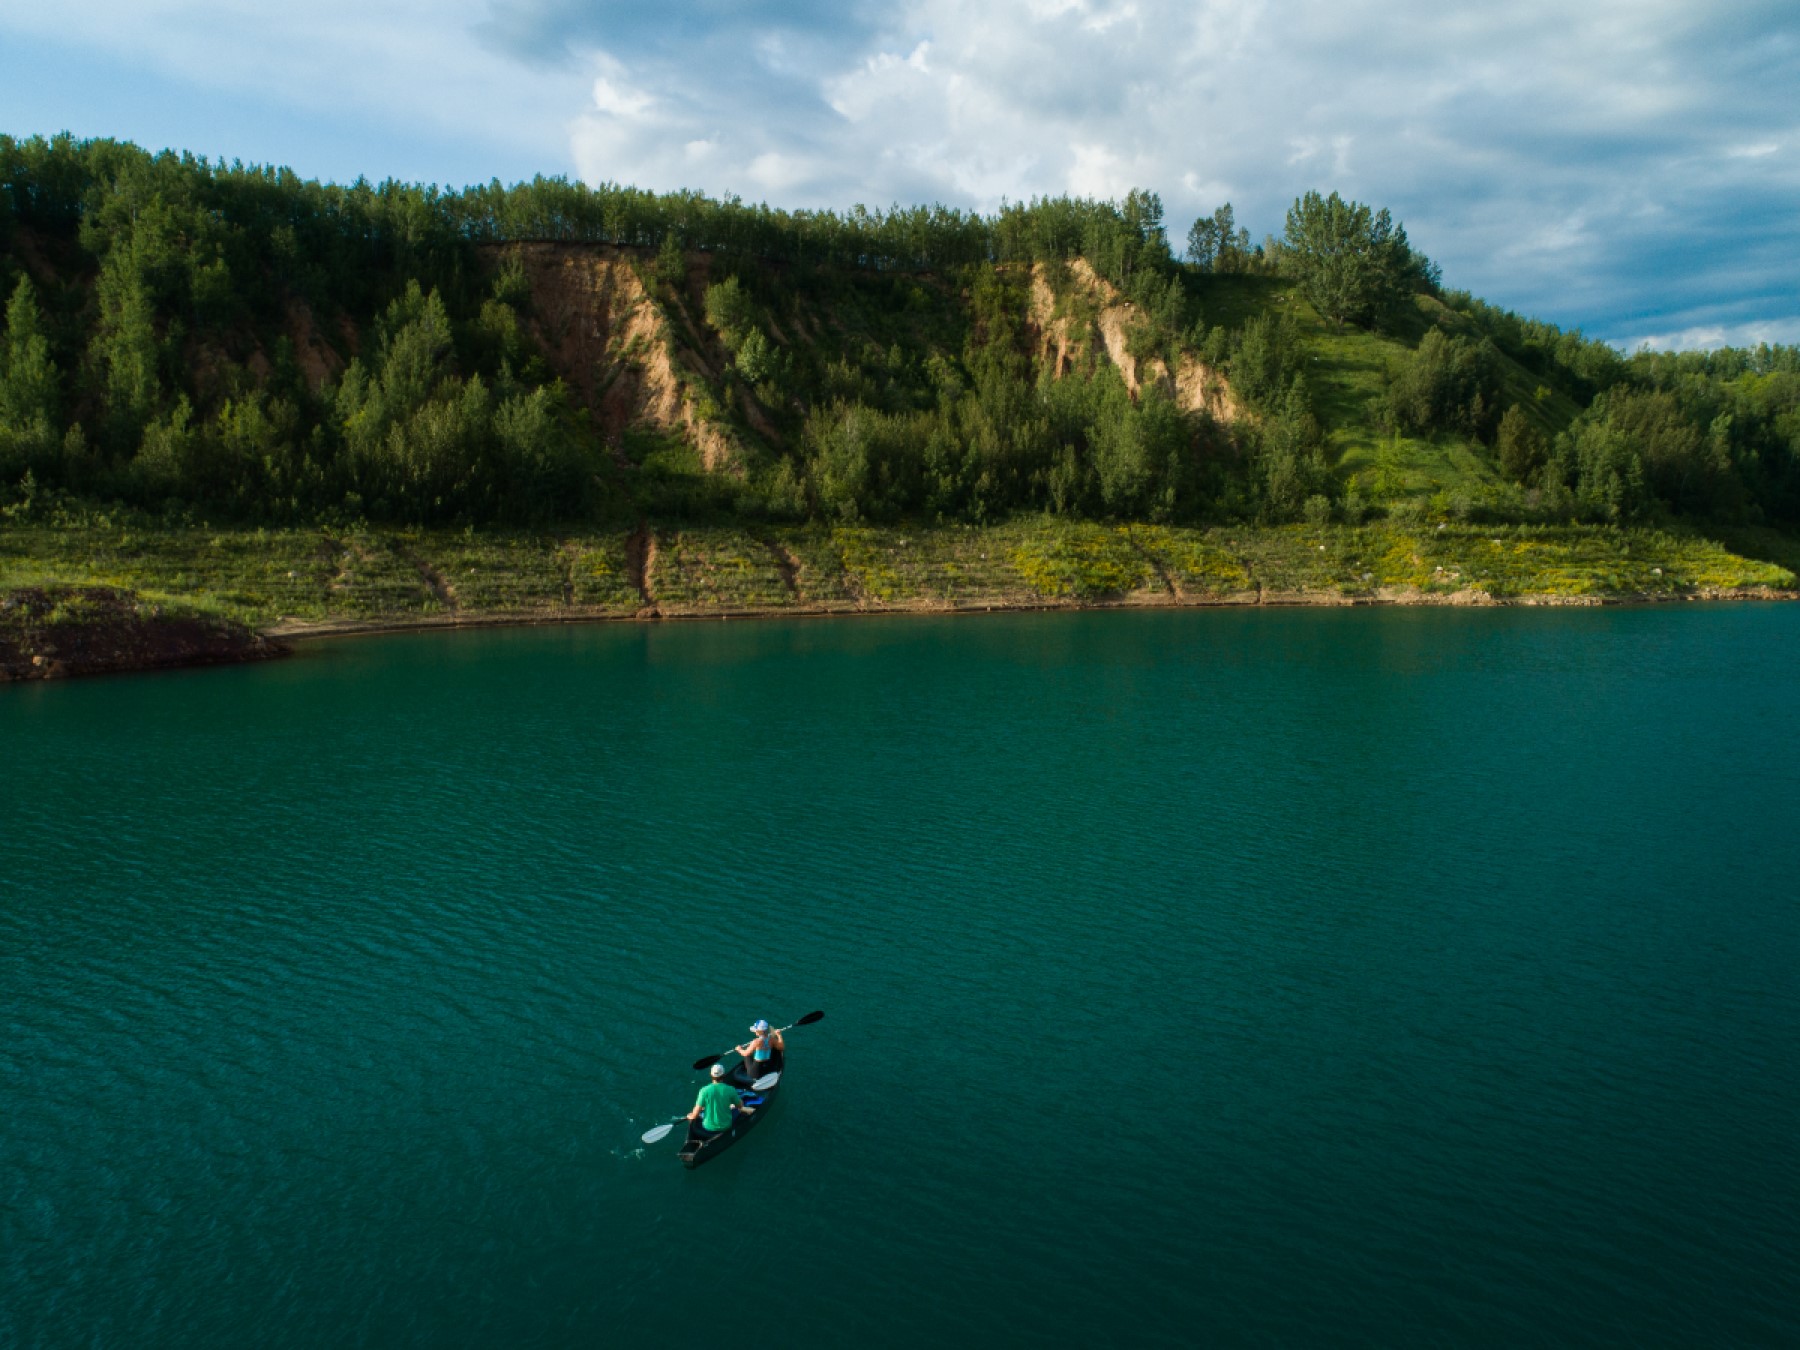 Two paddlers make their way across a mine pit lake in northern Minnesota.